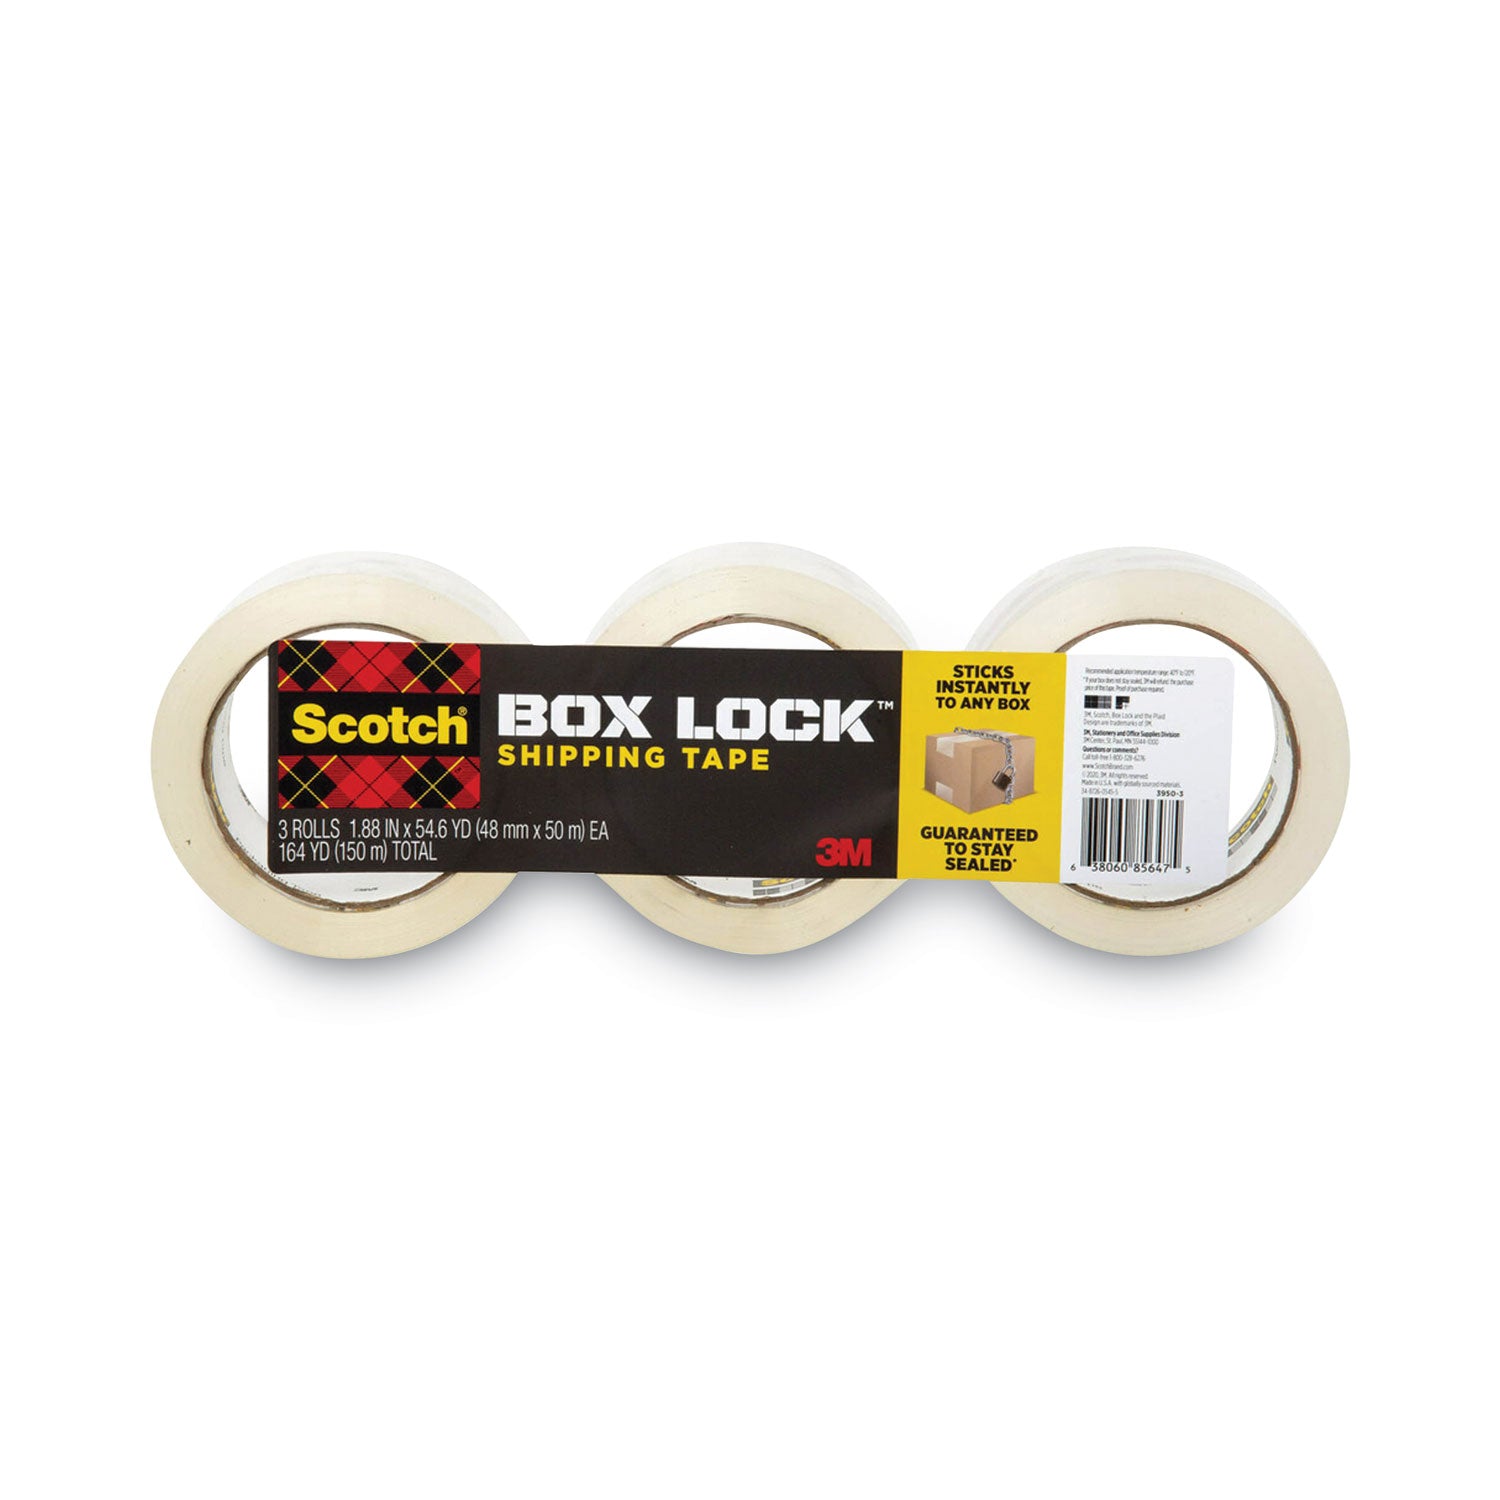 box-lock-shipping-packaging-tape-3-core-188-x-546-yds-clear-3-pack_mmm39503 - 1